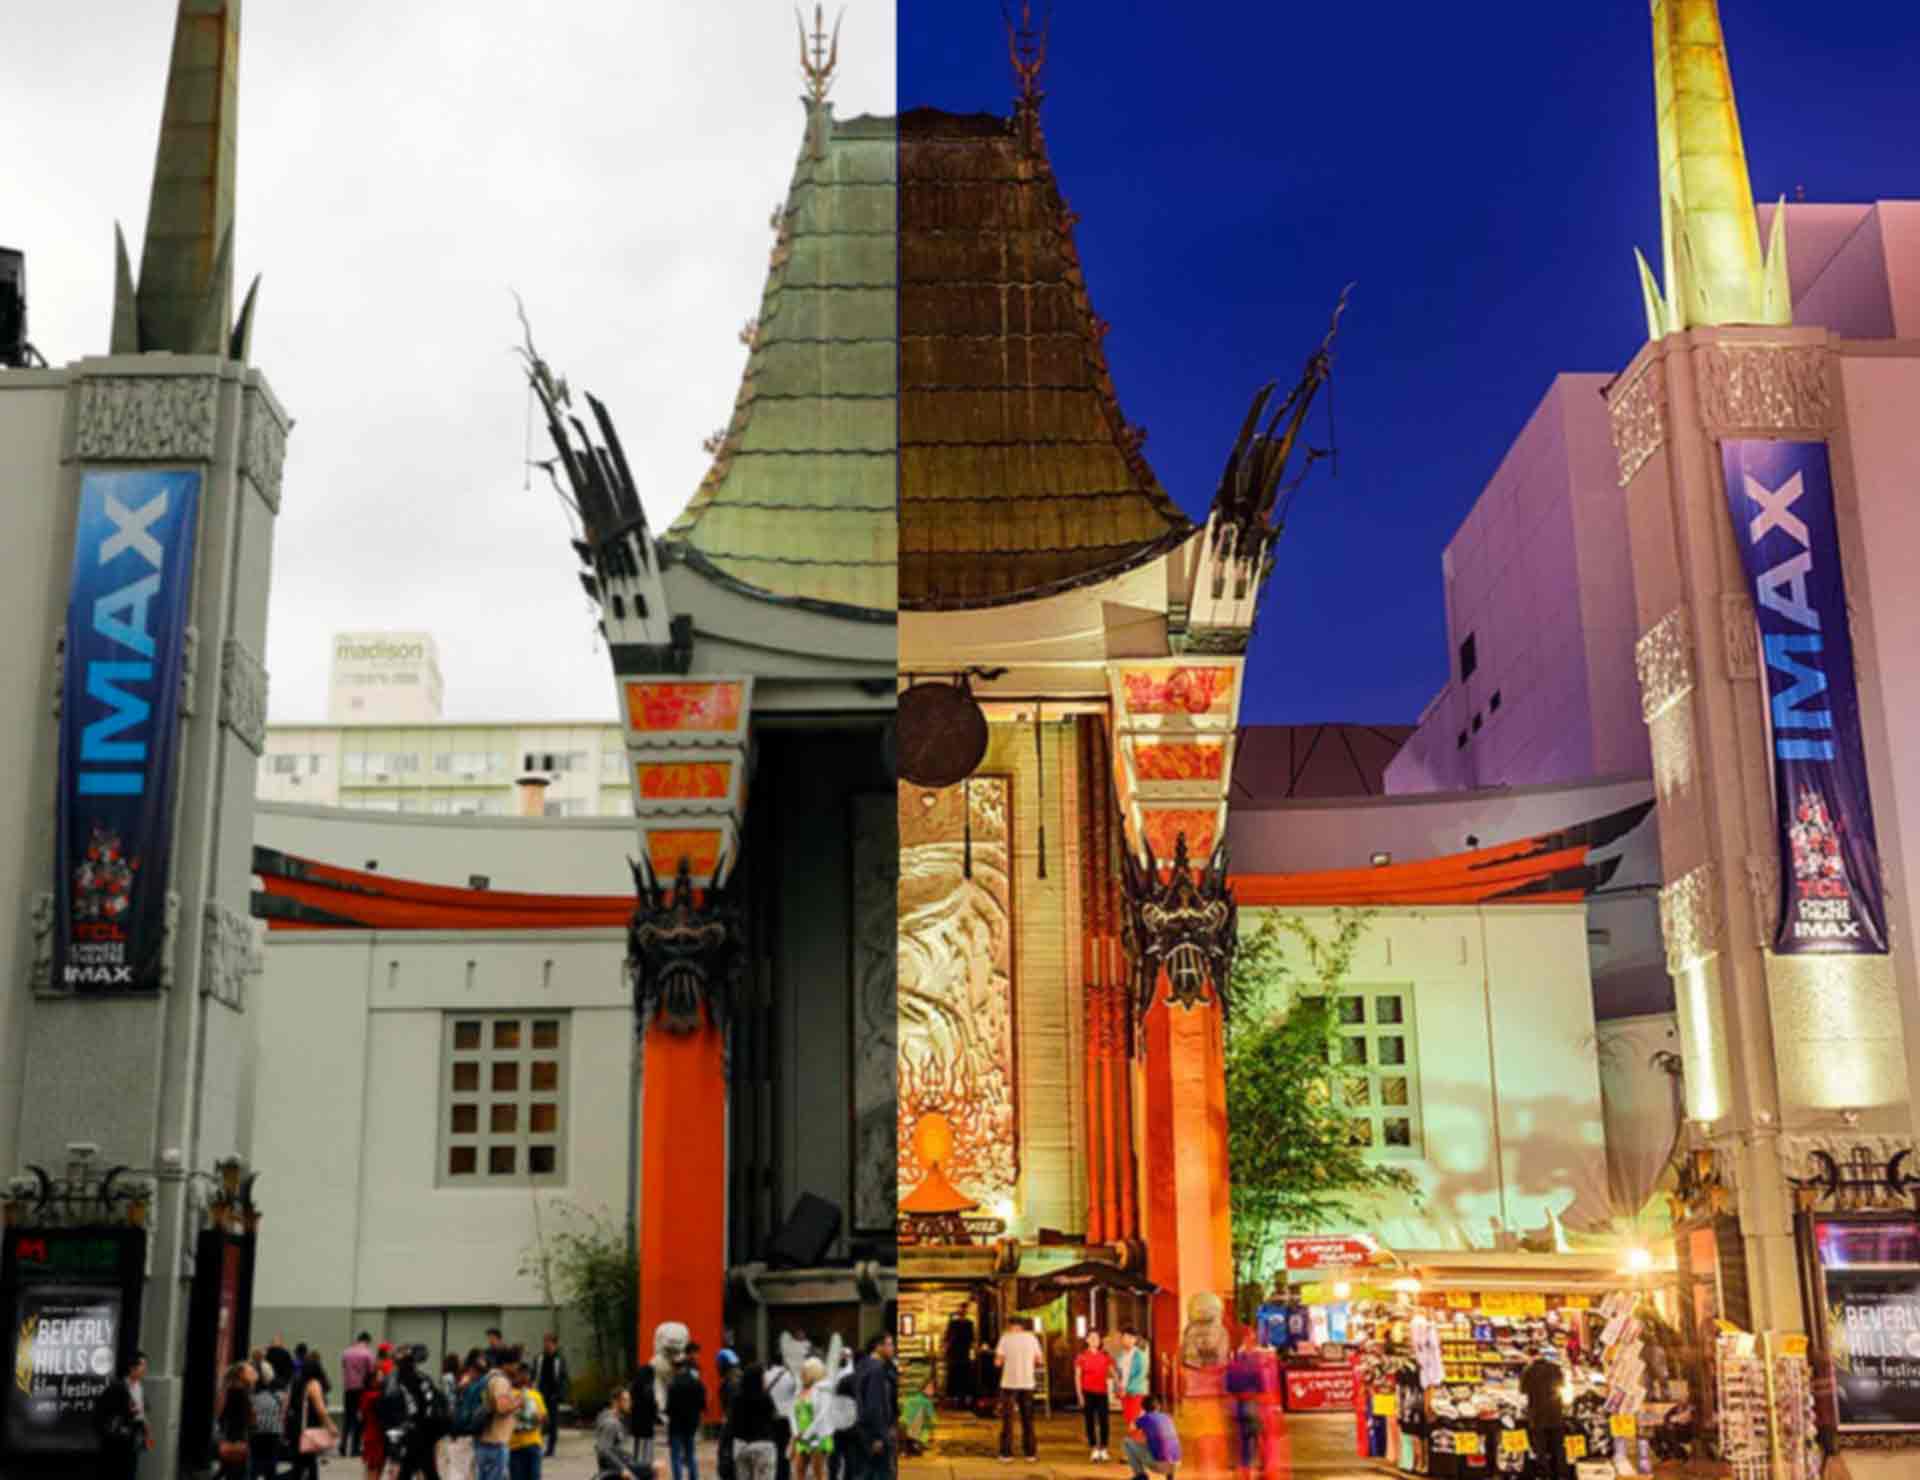 Chinese theater with brand